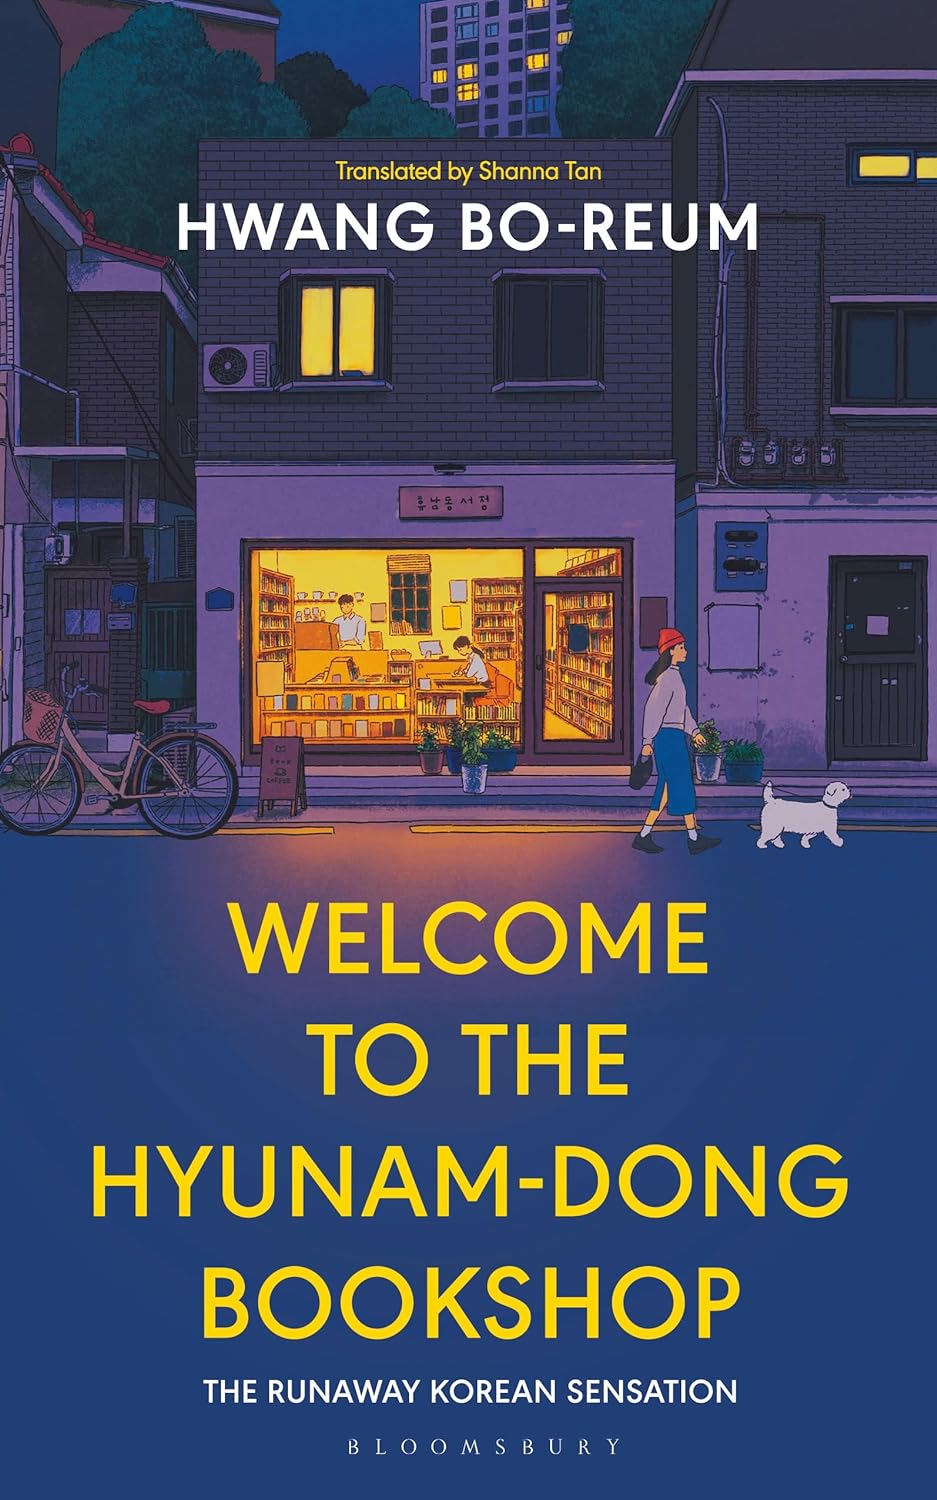 Book Club Penguins - Book 10 Membership: Welcome to the Hyunam-dong Bookshop by Hwang Bo-reum